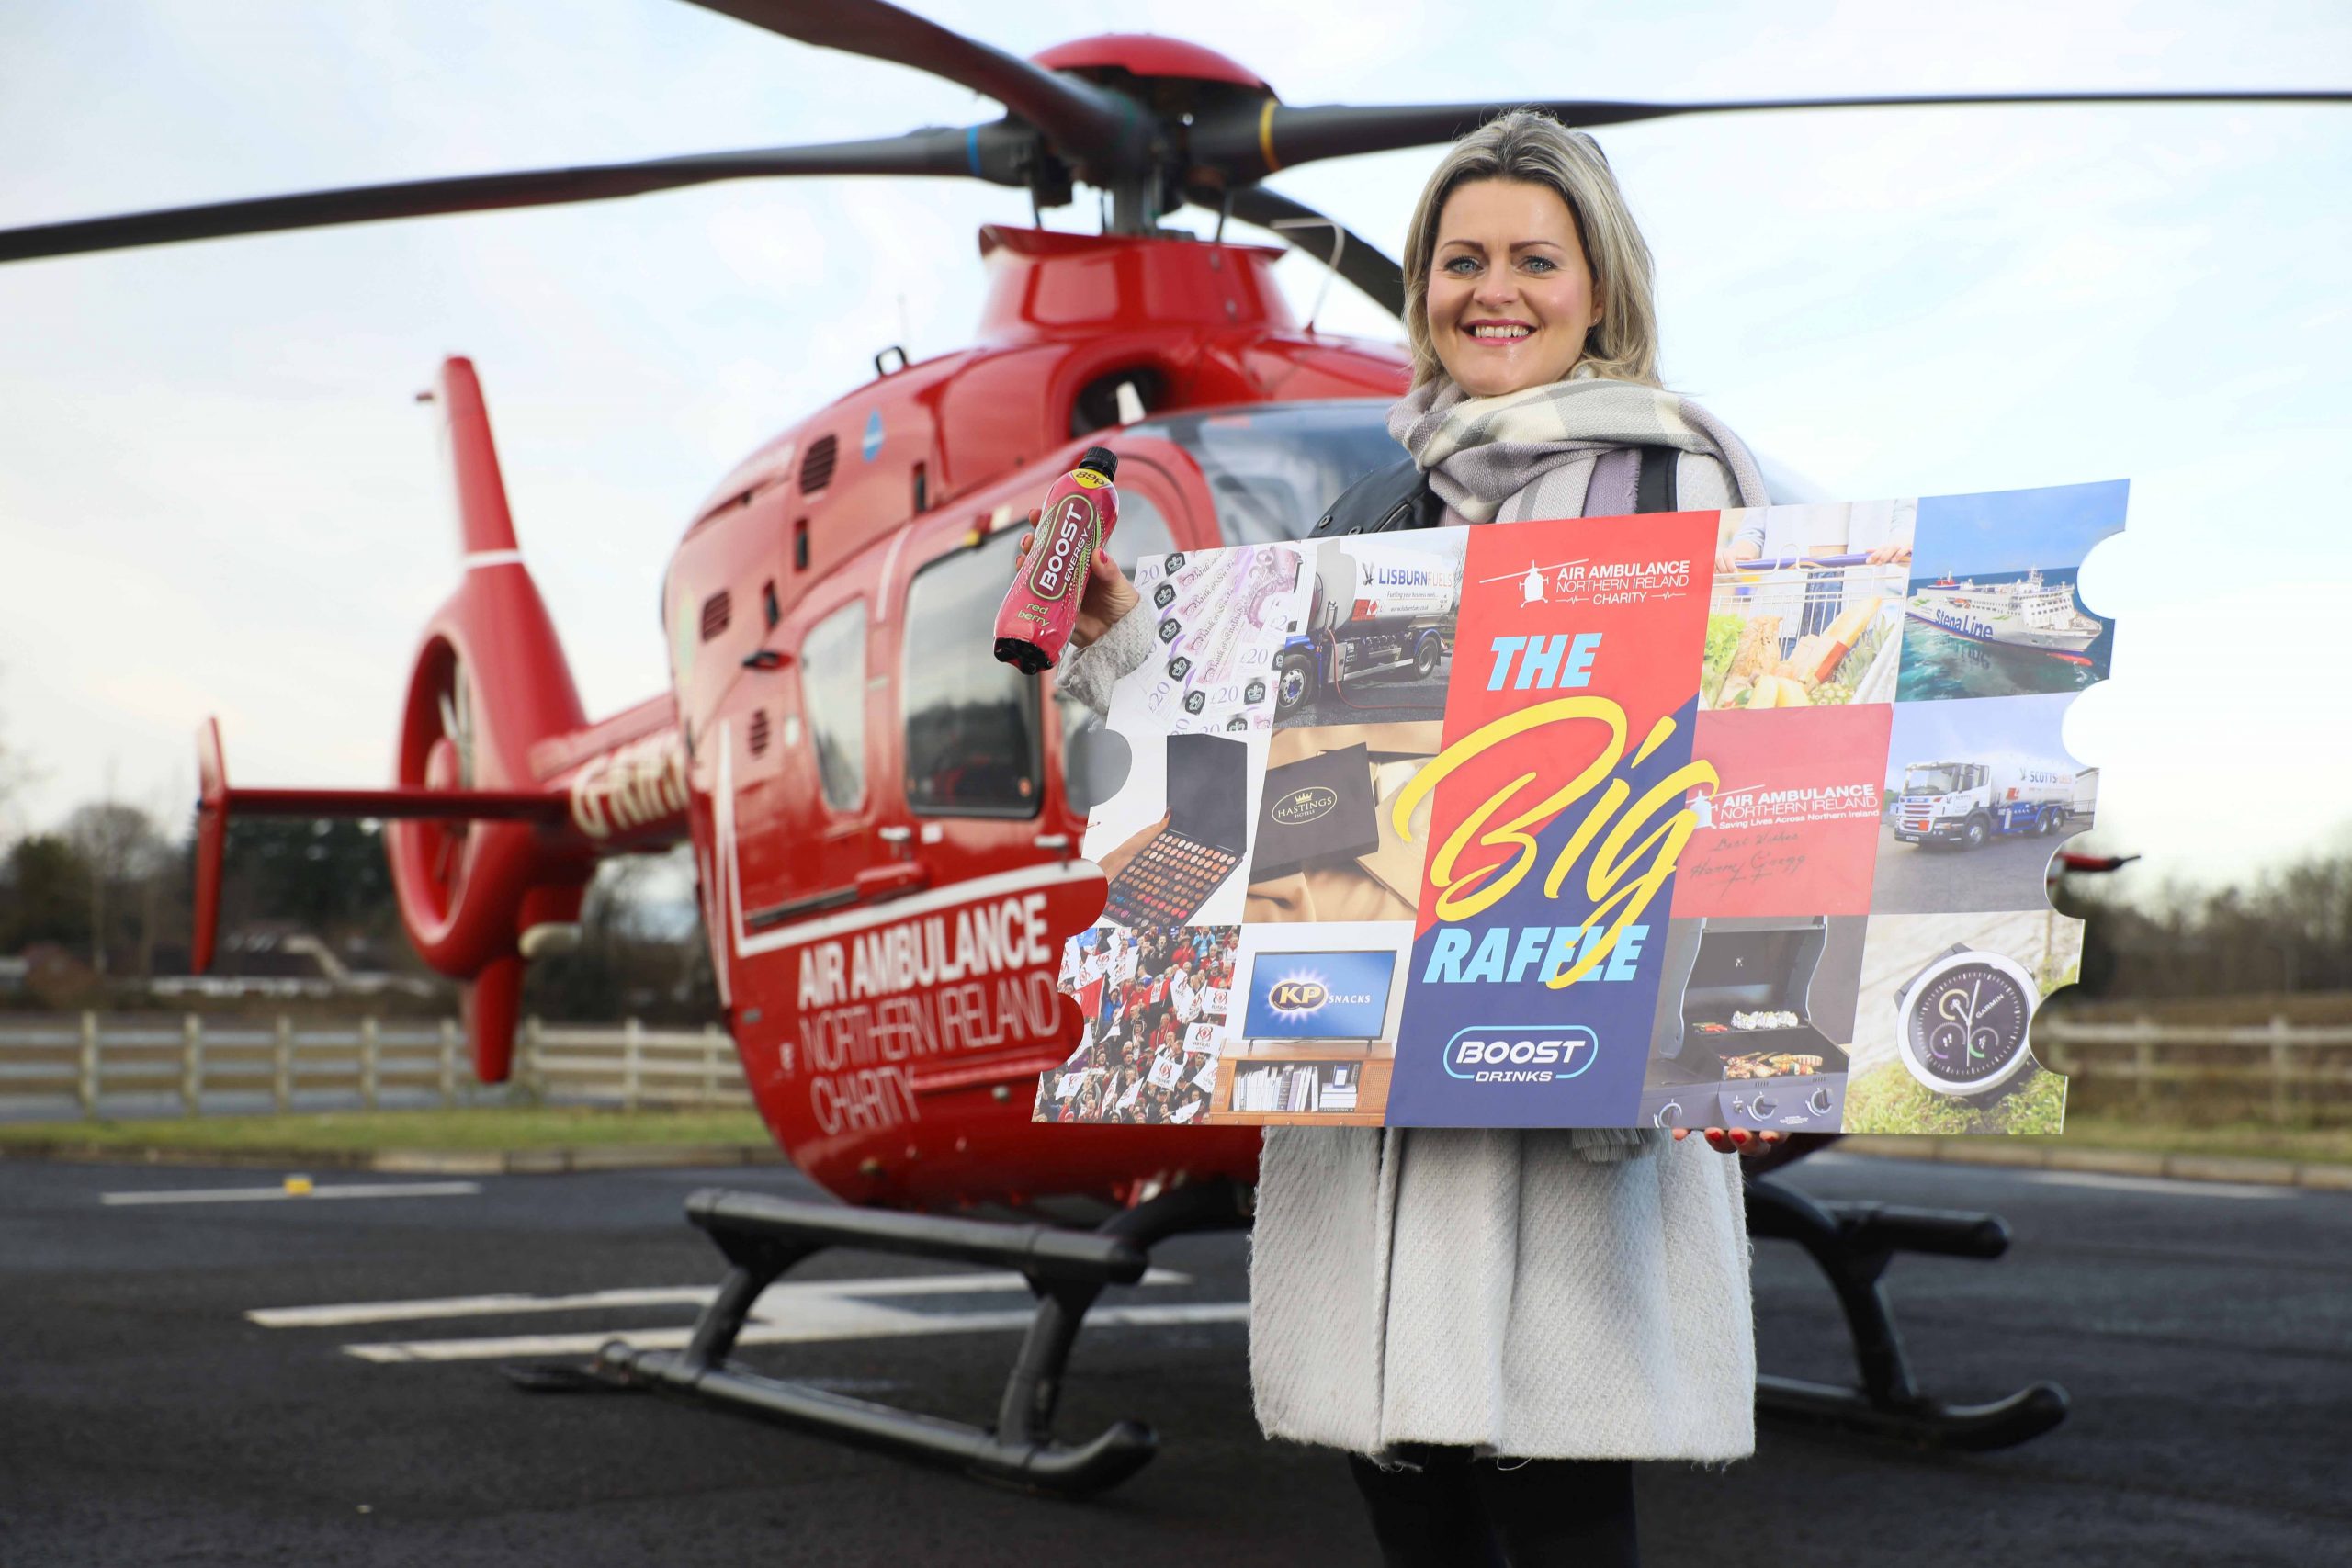 Air Ambulance NI to BOOST your mood with spectacul-AIR raffle